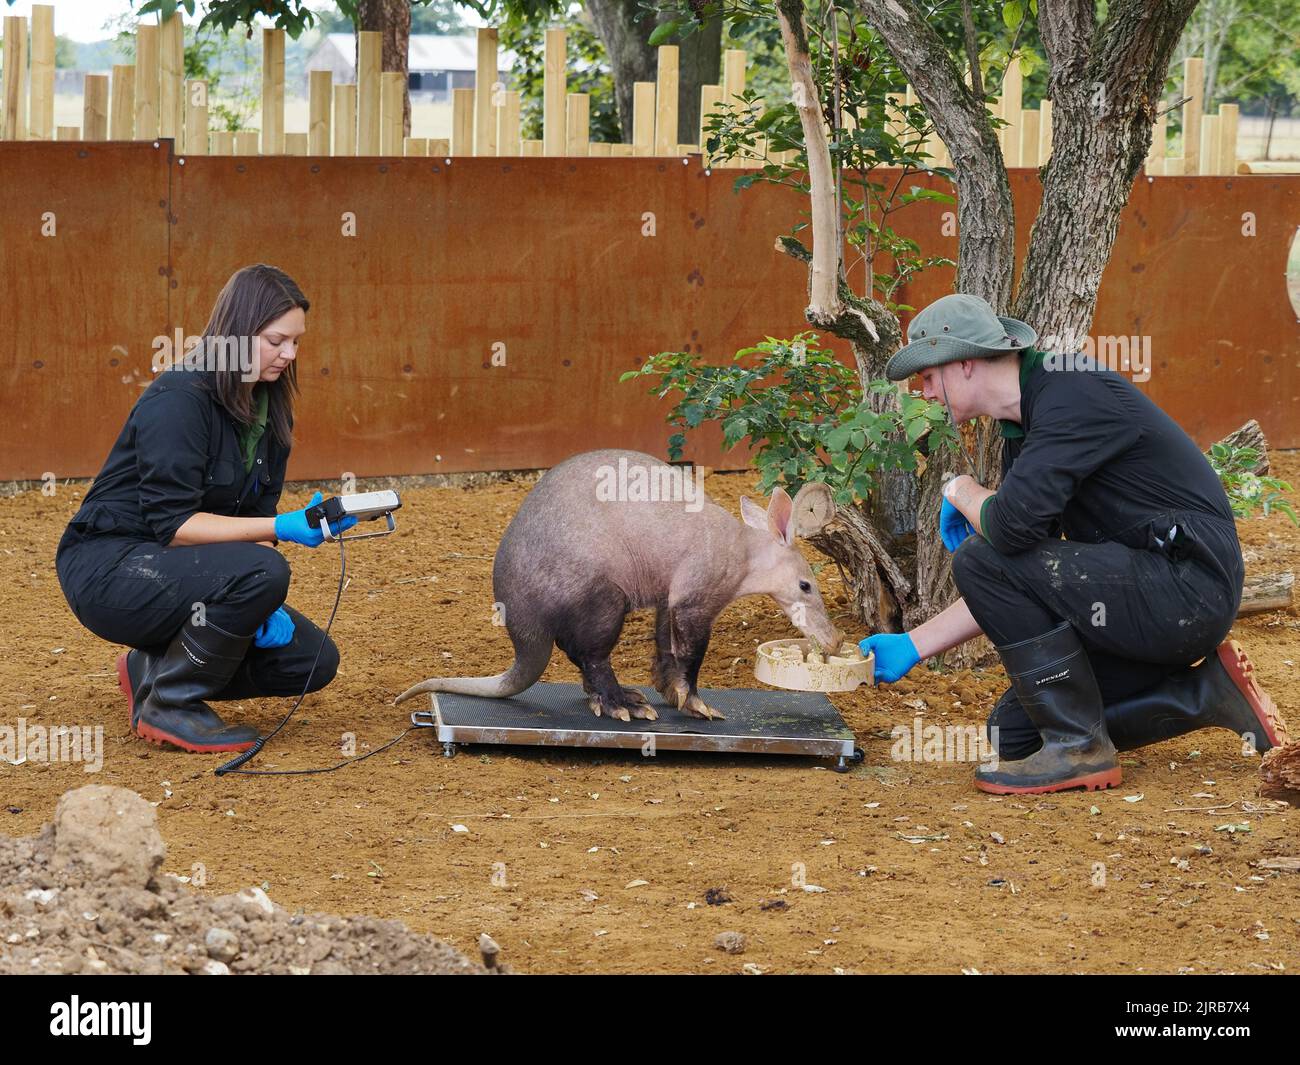 Bedfordshire, England, UK 23rd Aug. 2022. Thousands of animals great and small get weighed in the annual weigh-in at ZSL Whipsnade Zoo. (Credit P. Bhandol) Credit: Parmorama/Alamy Live News Stock Photo